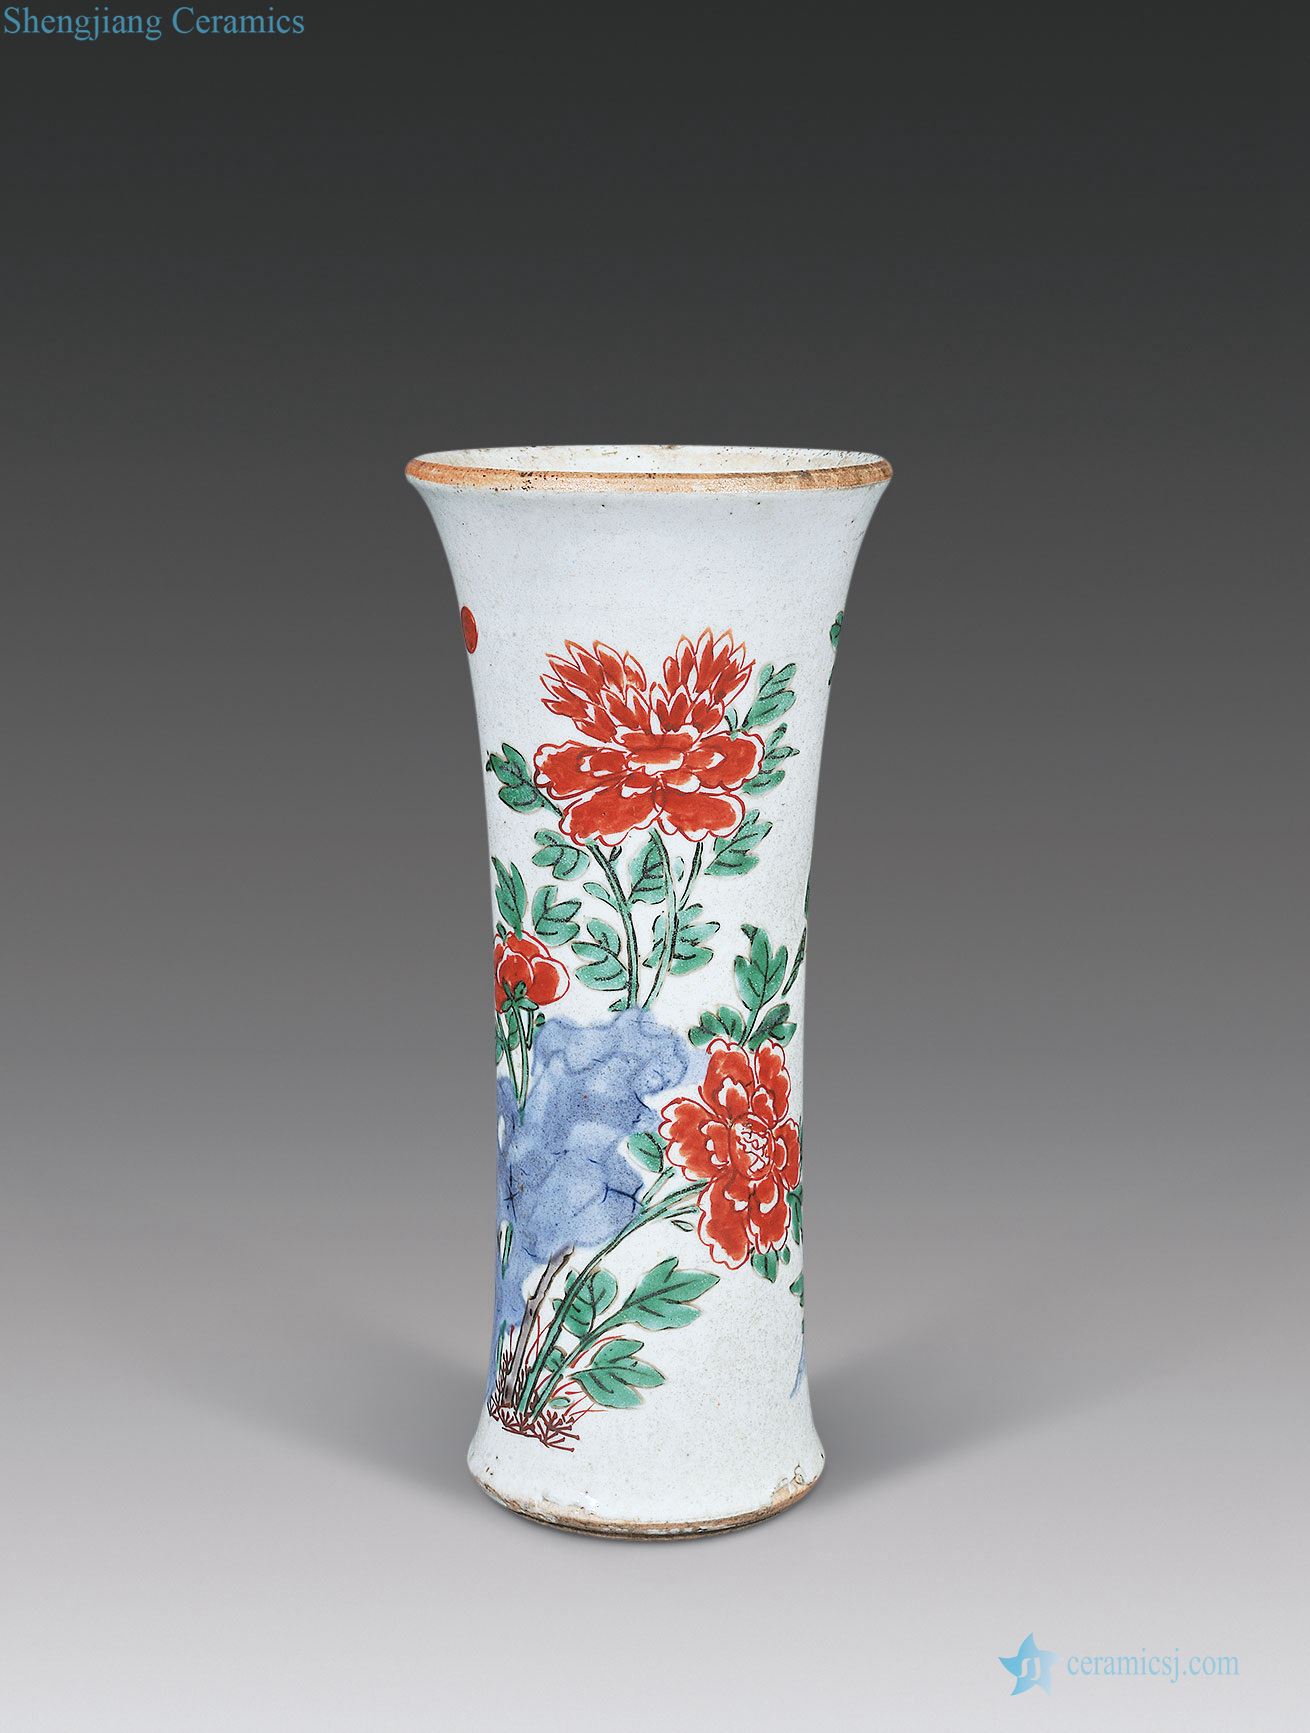 Qing shunzhi Blue and white grain flower vase with colorful painting of flowers and birds